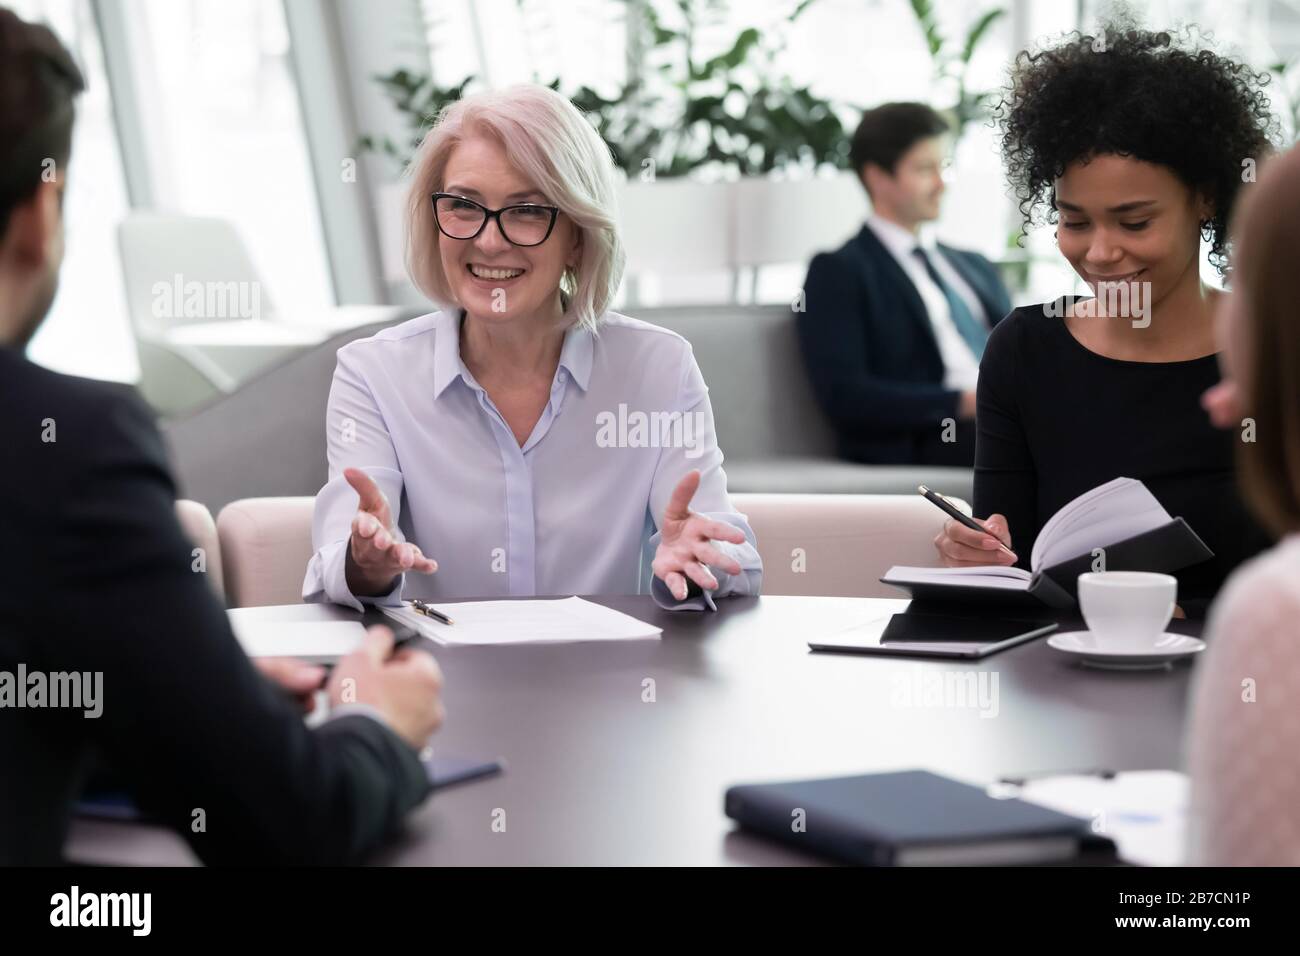 Diverse multiethnic businesspeople discuss paperwork at meeting Stock Photo